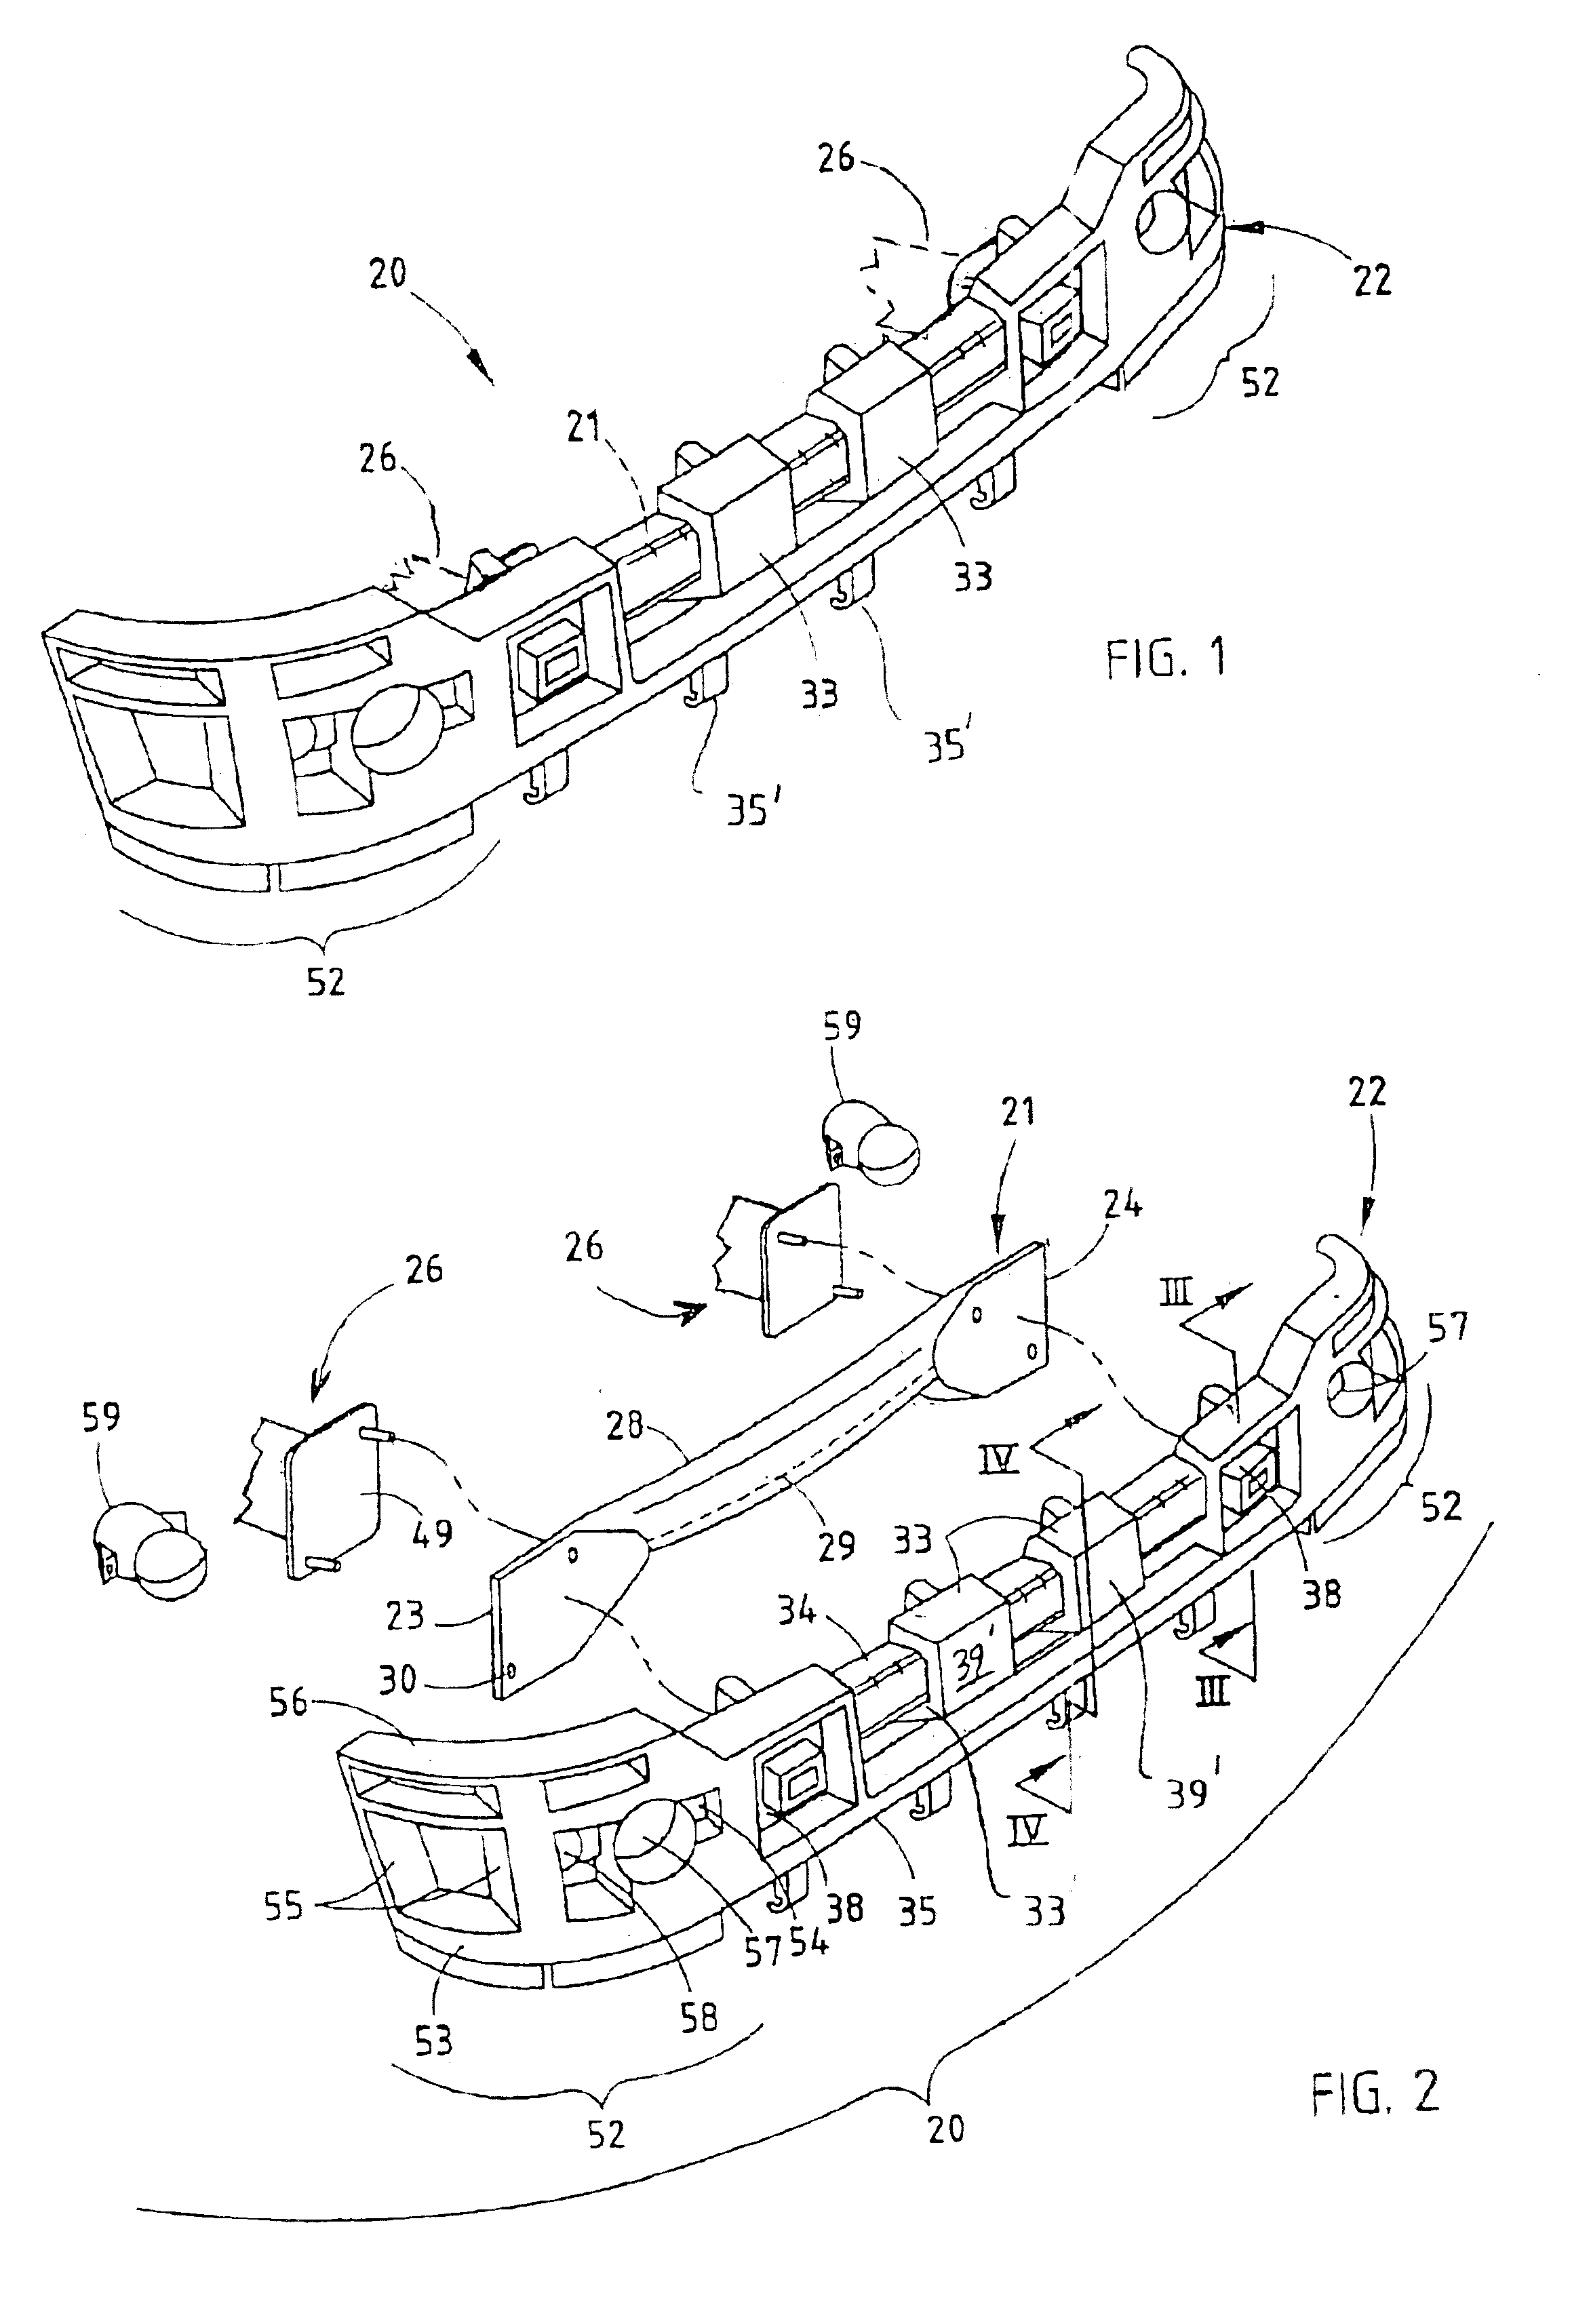 Bumper with integrally formed energy absorber